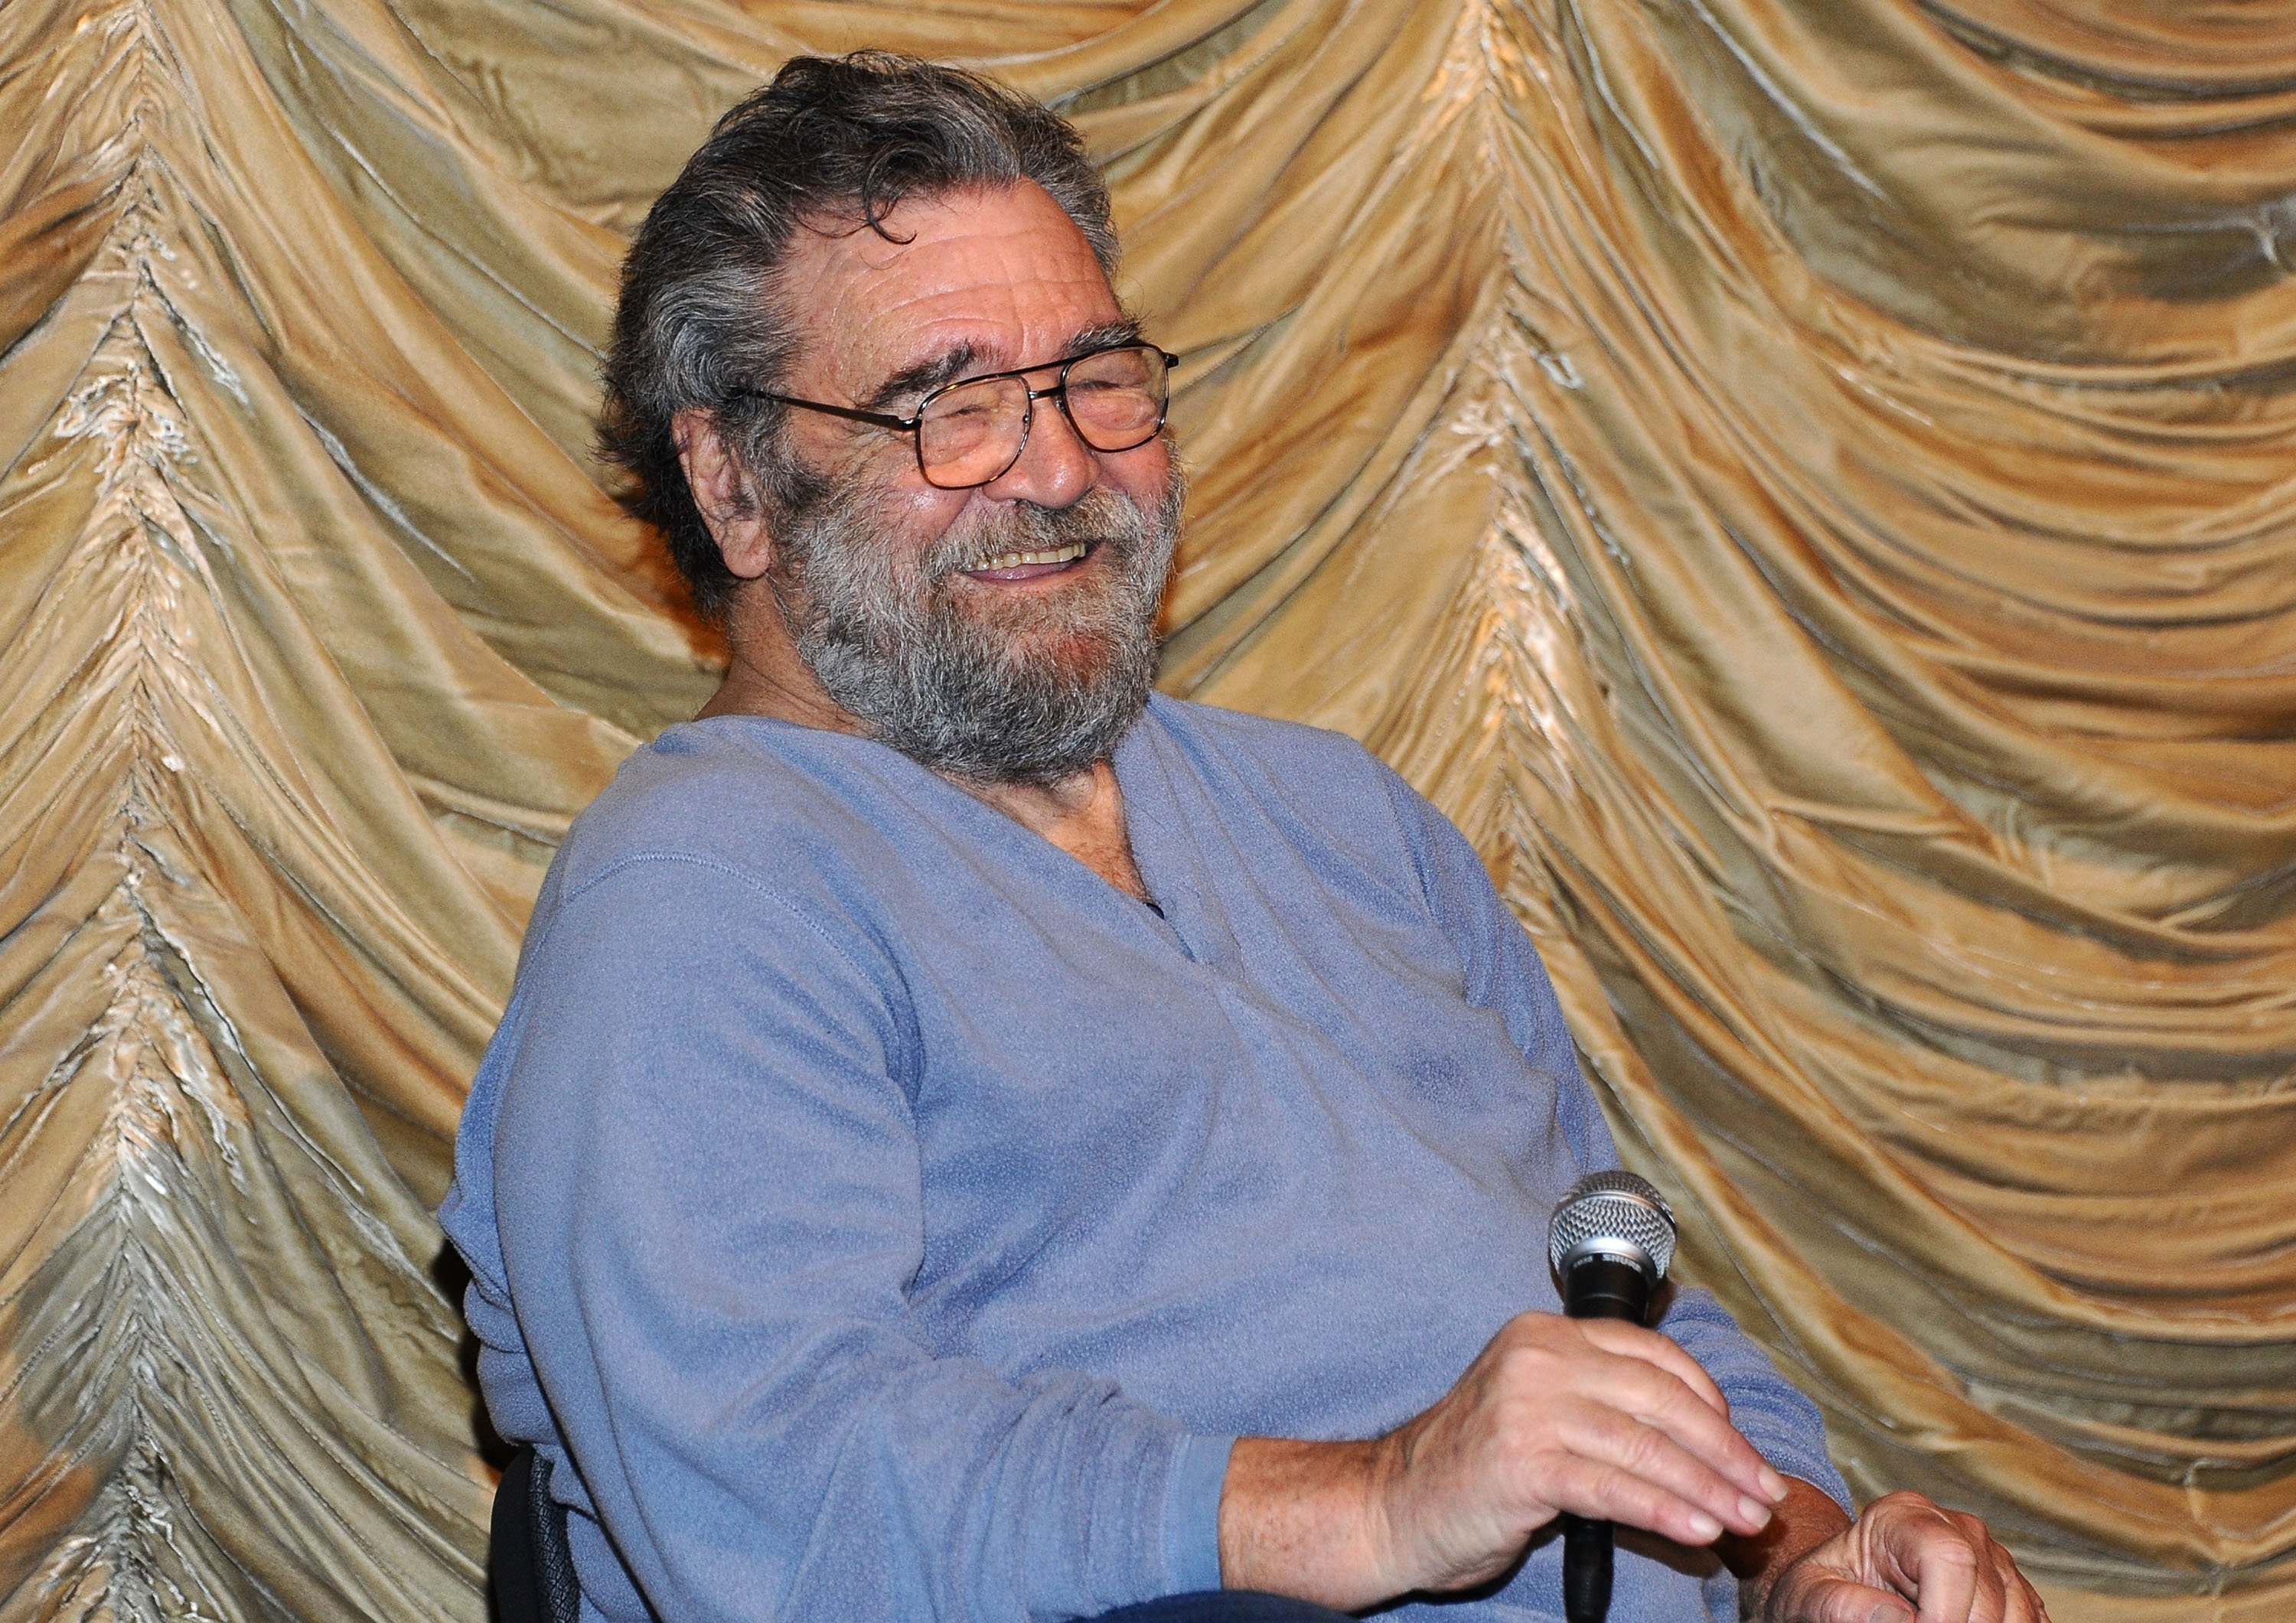 Ralph Bakshi, director of 'The Lord of the Rings,' in front of a curtain